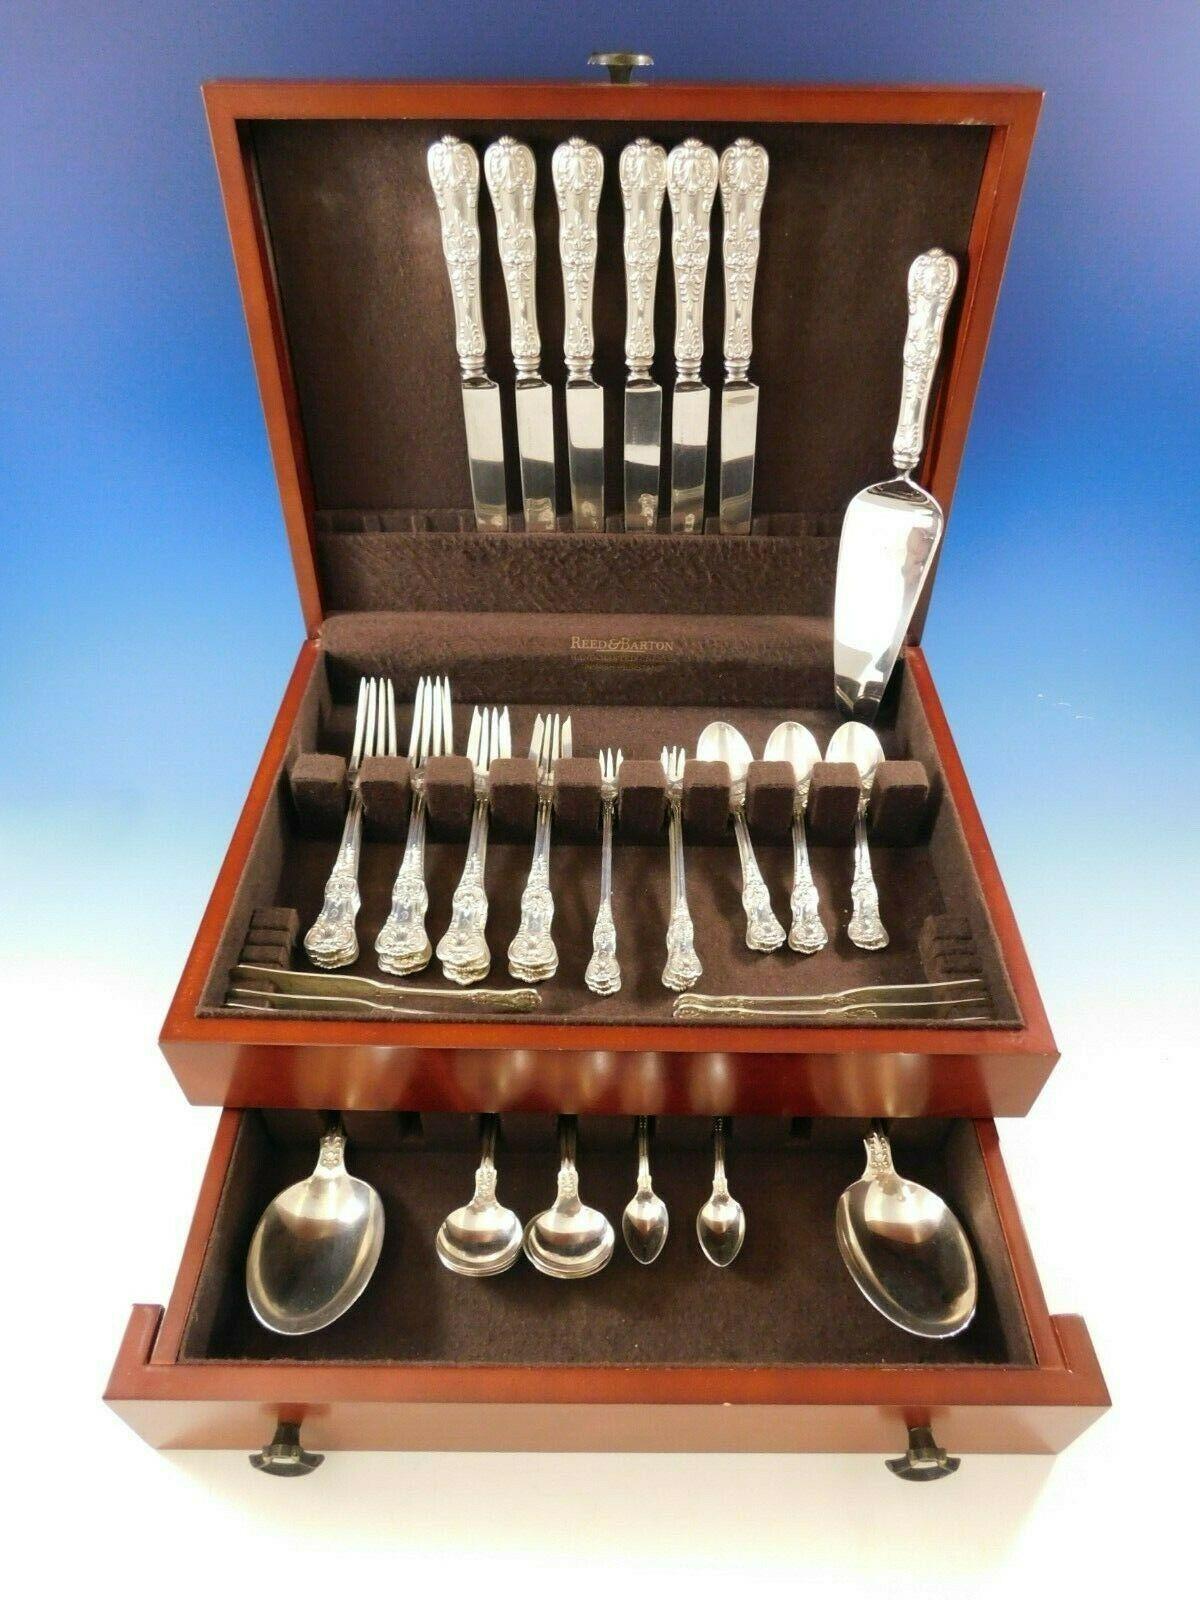 Dinner size English King by Tiffany & Co. sterling silver flatware set, 51 pieces. This impressive set includes:

6 dinner size knives, 10 1/4